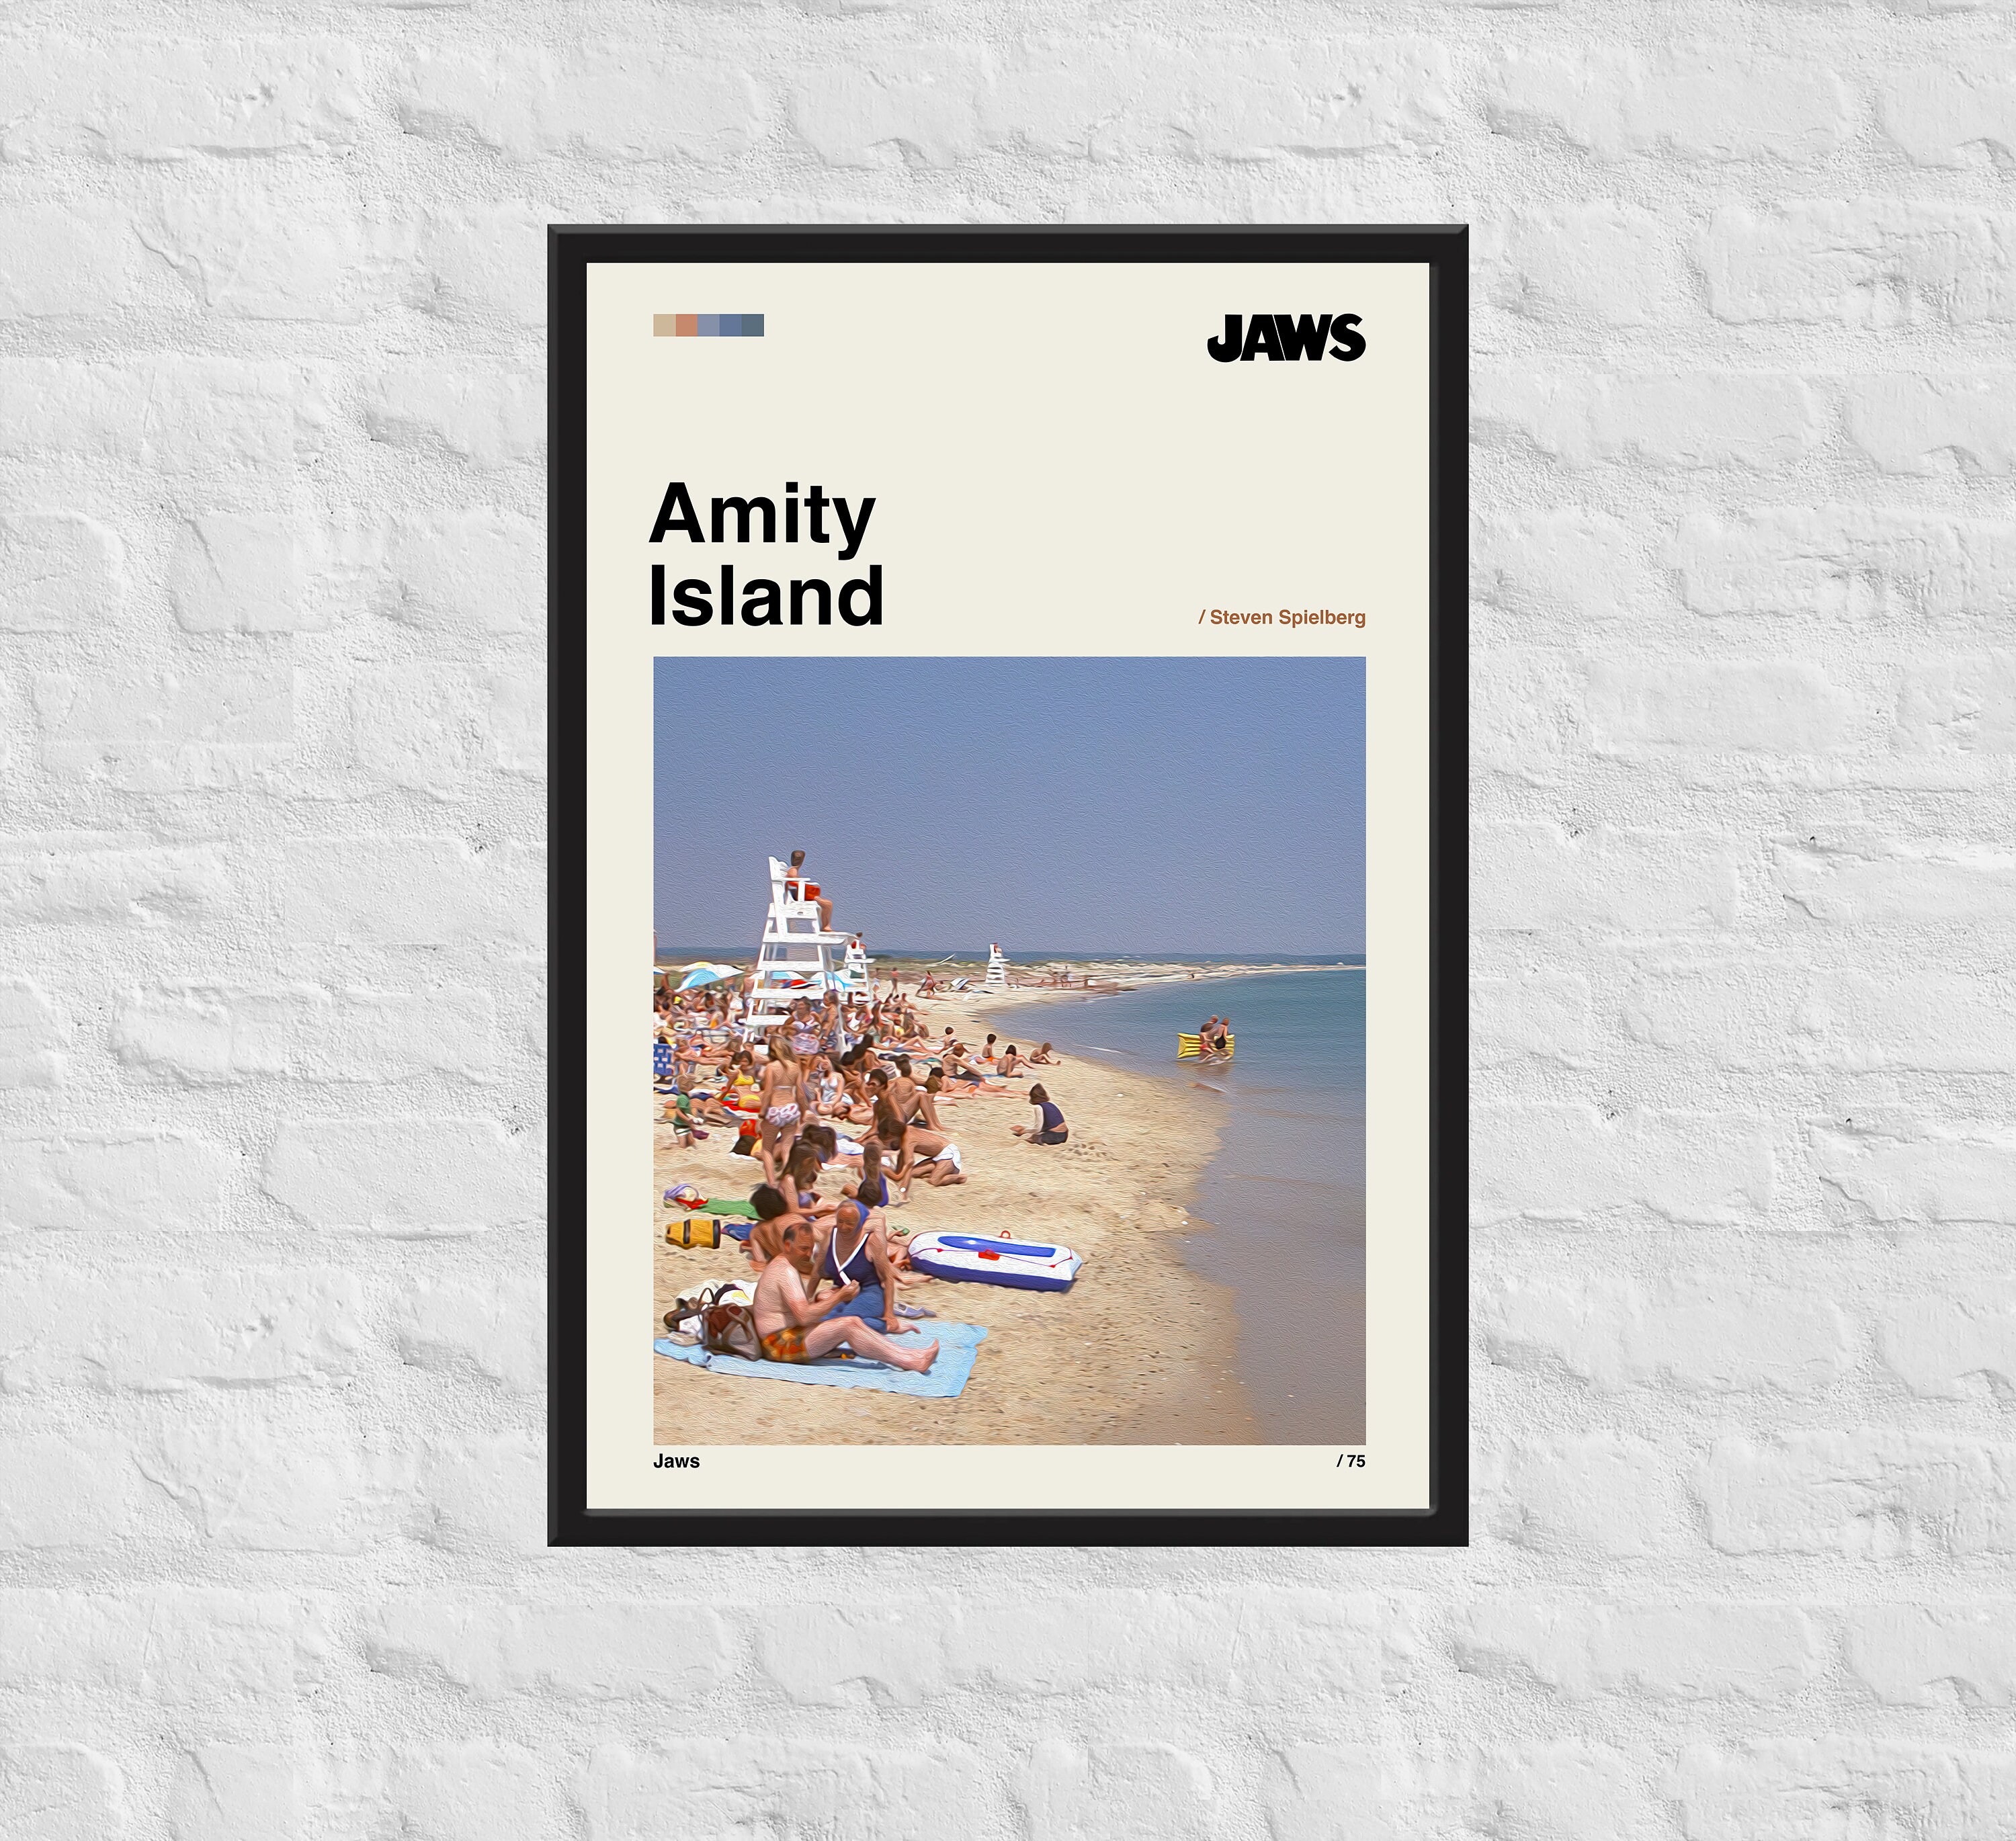 Amity Island Poster, Jaws Movie Poster, Minimalist Poster, Digital Oil Paint Style, Classic Movie Poster, Home Decor, Wall Decor, Gifts Art